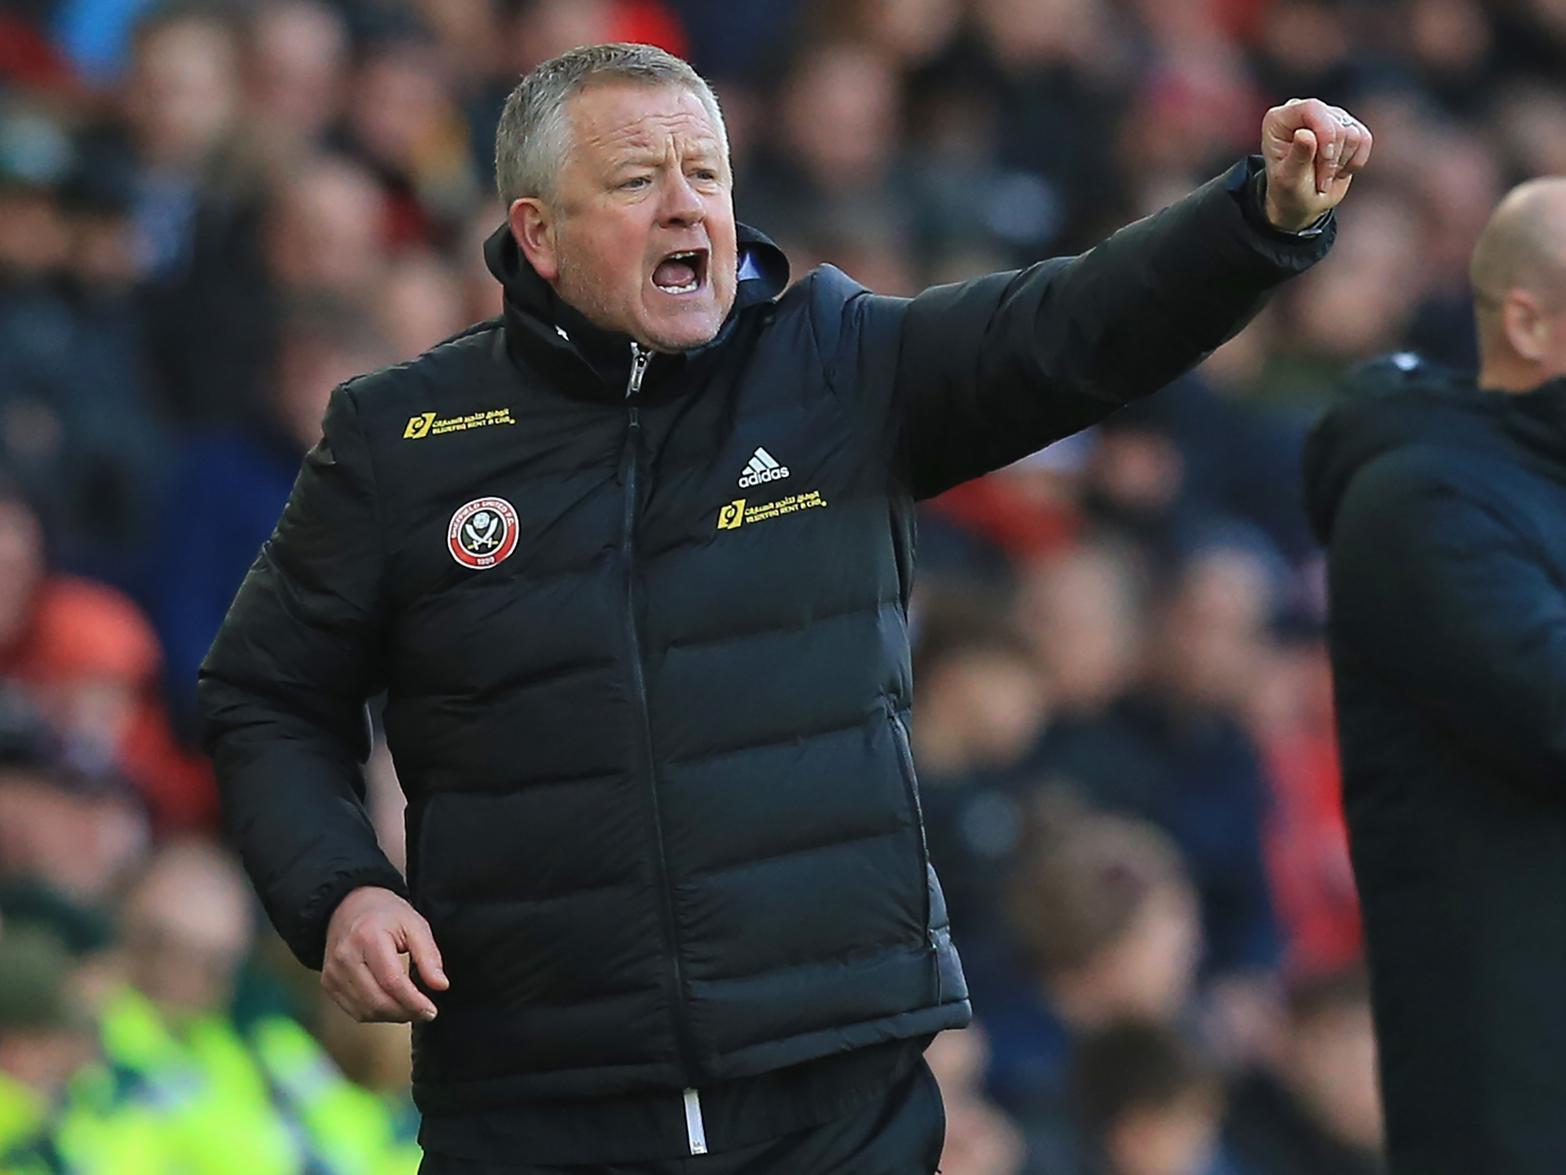 Chris Wilder has urged fans not to pay attention to the league table ahead of the clash, claiming it would be a big mistake to underestimate their opponents. The Seagulls are in 15th, without a win since last year.